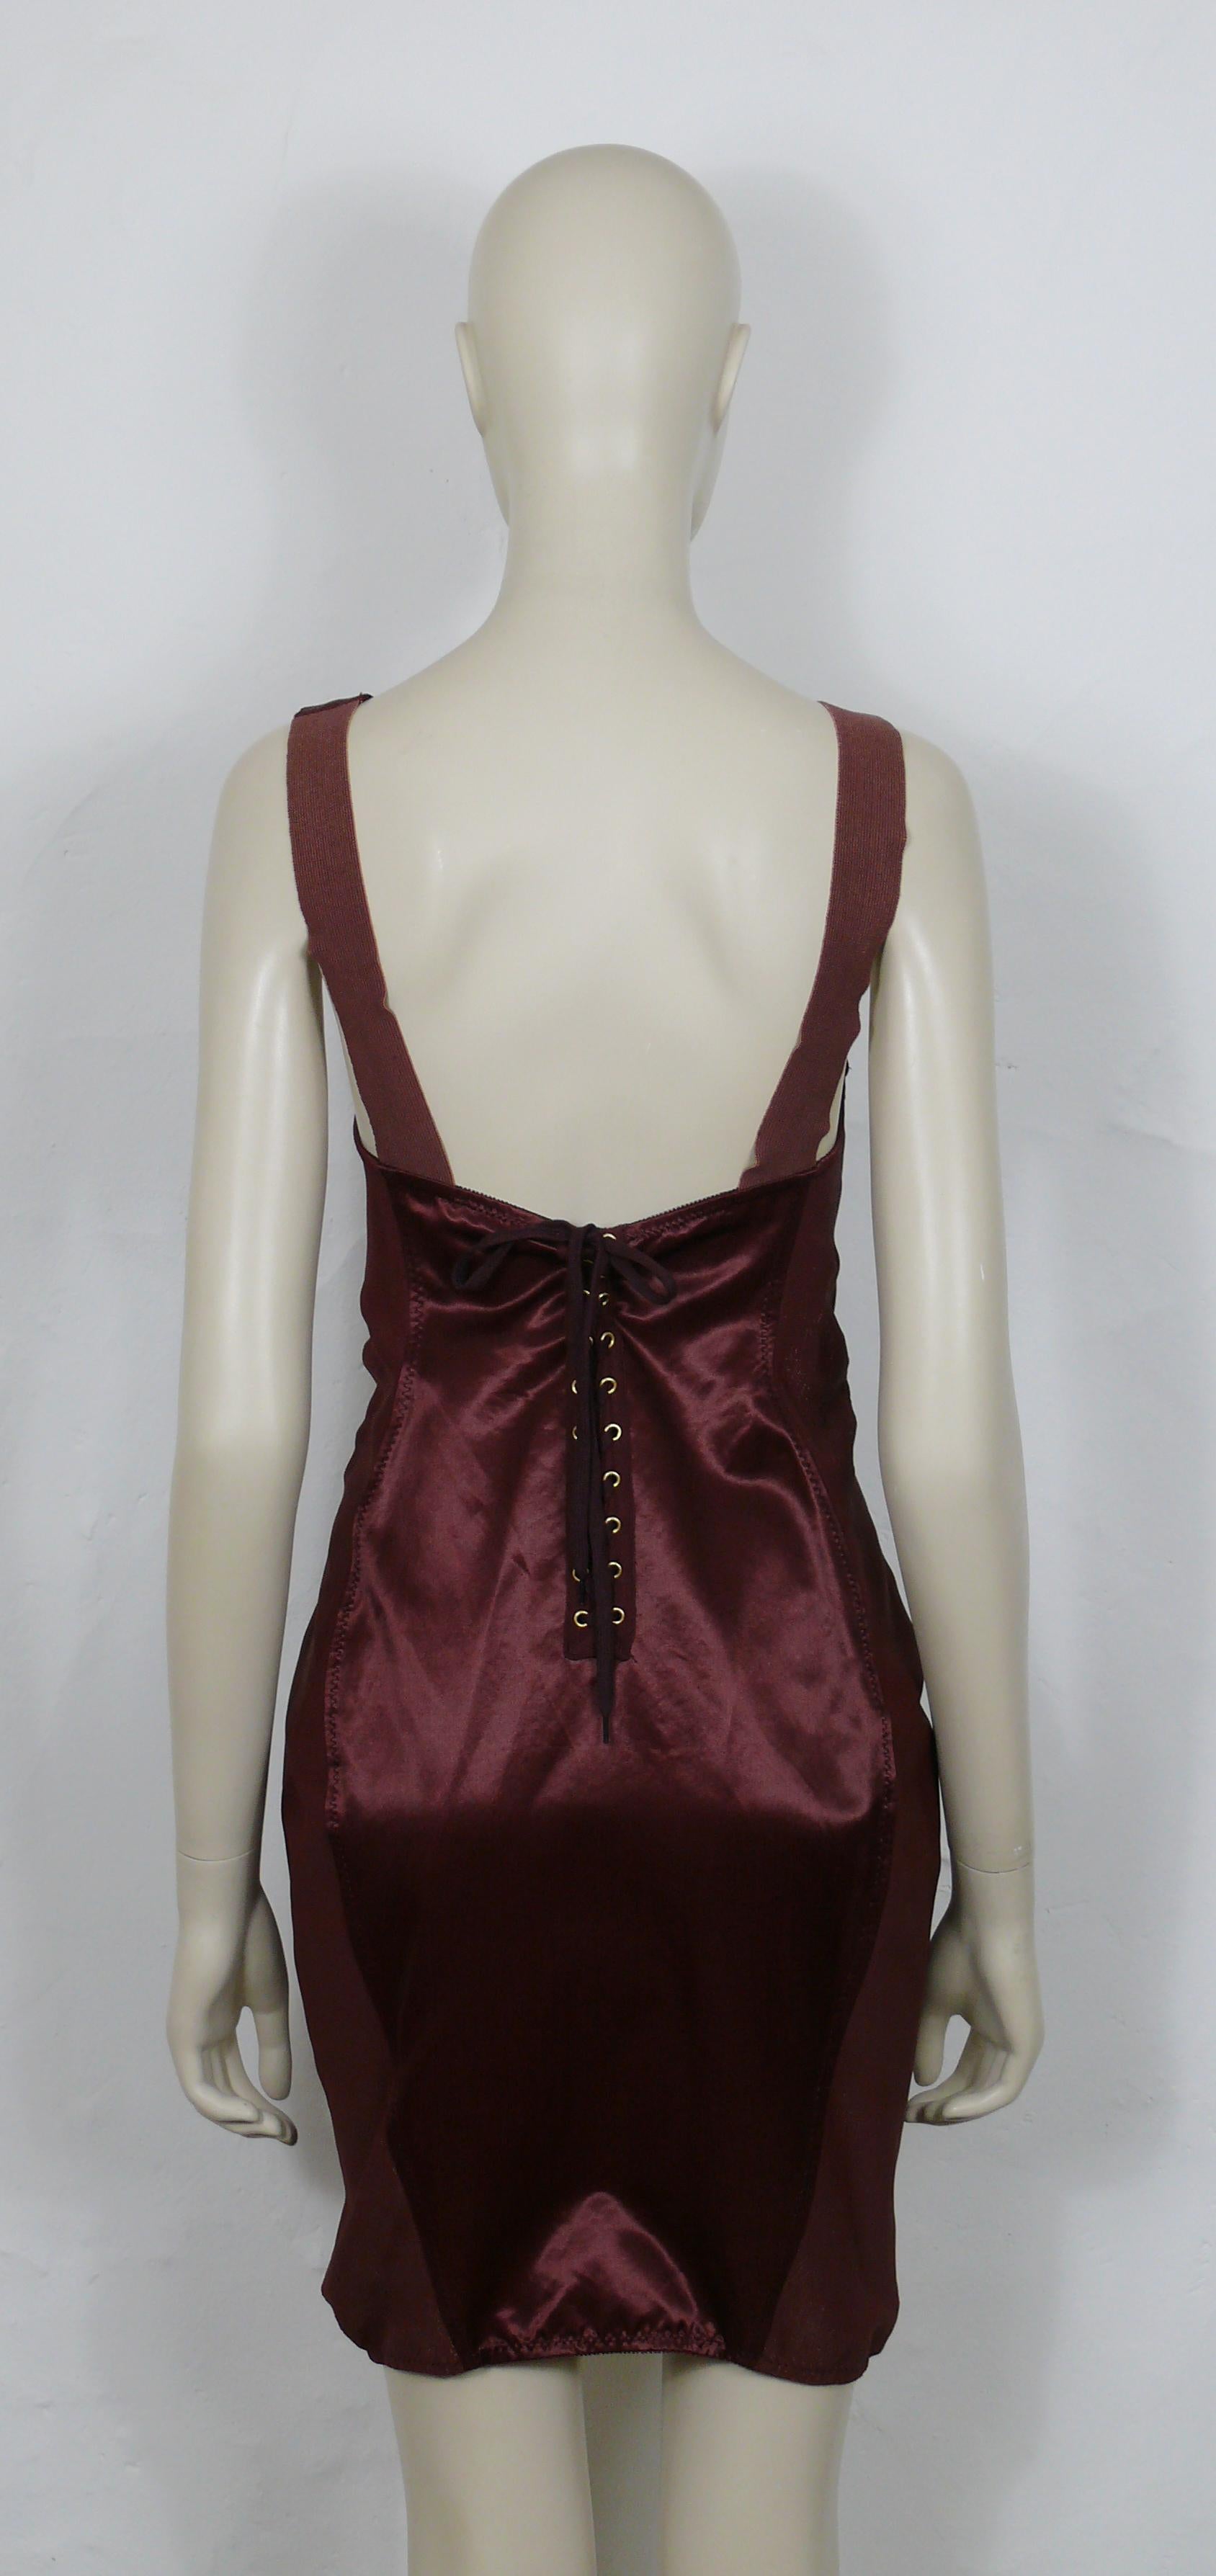 JEAN PAUL GAULTIER JUNIOR Vintage Iconic Cone Bust Corset Bodycon Dress In Fair Condition For Sale In Nice, FR